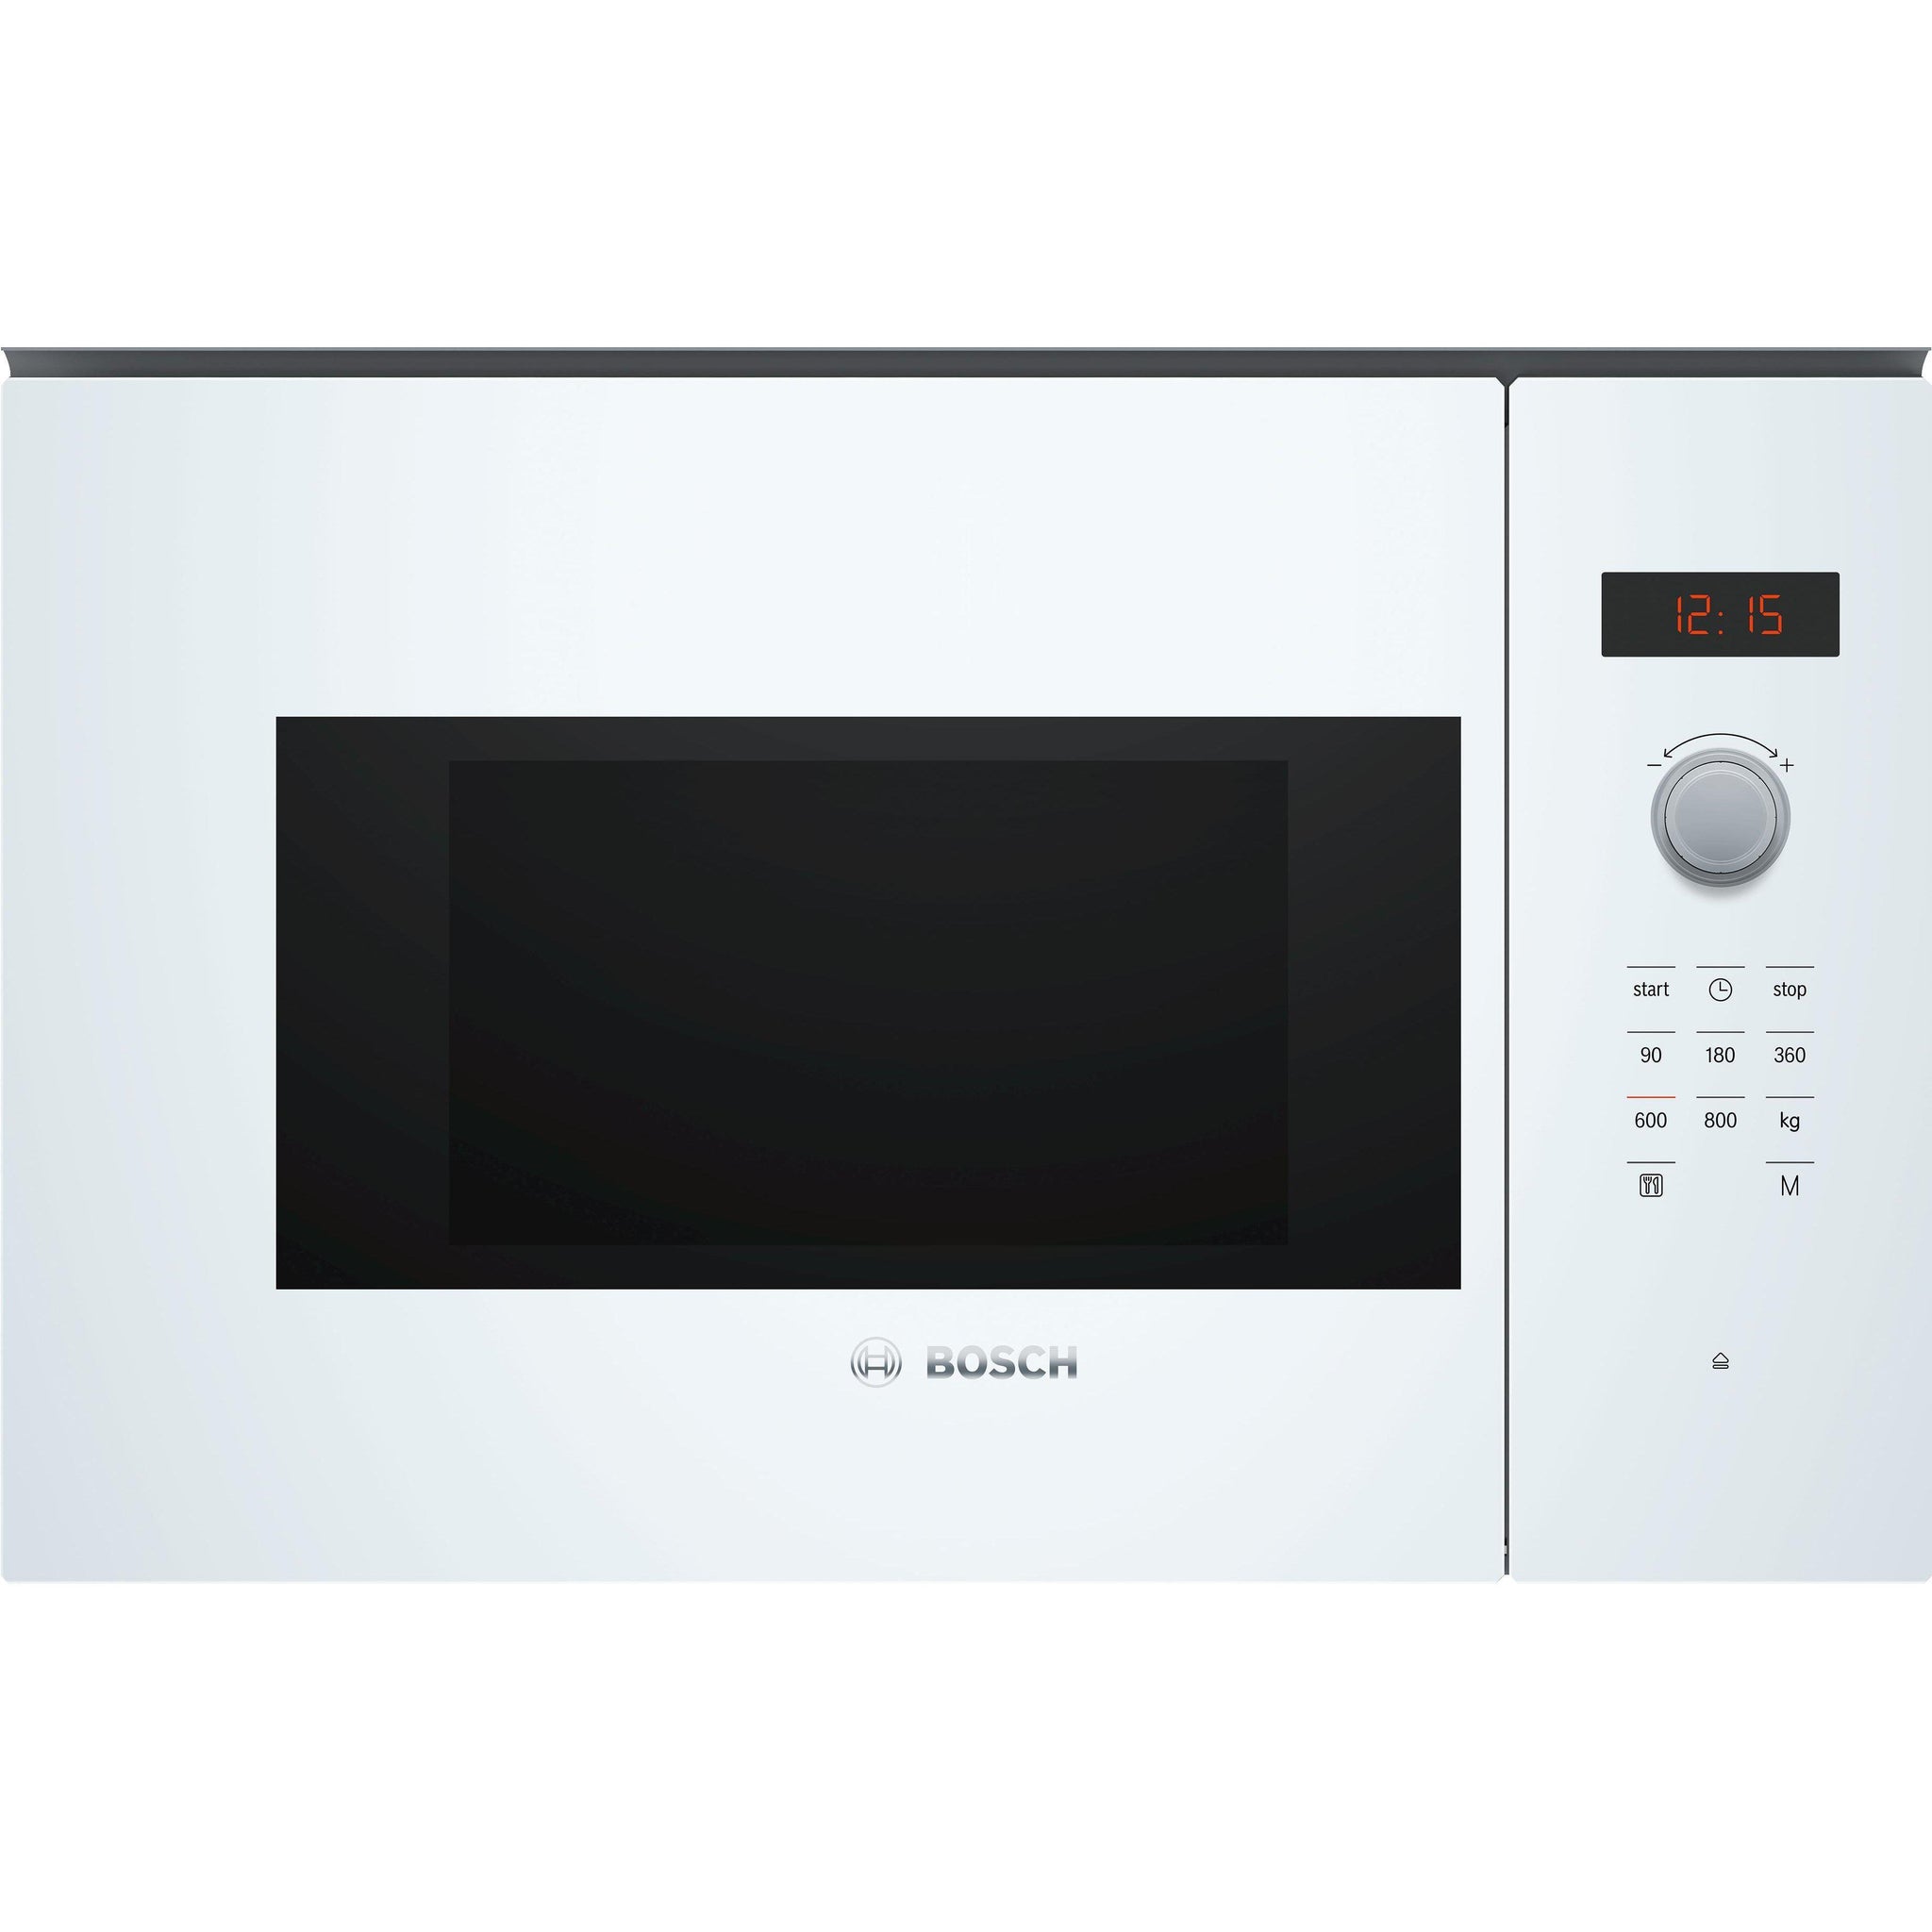 Bosch Serie 4 Bfl523mw0b Builtin Microwave White Delivery Within 710 Days